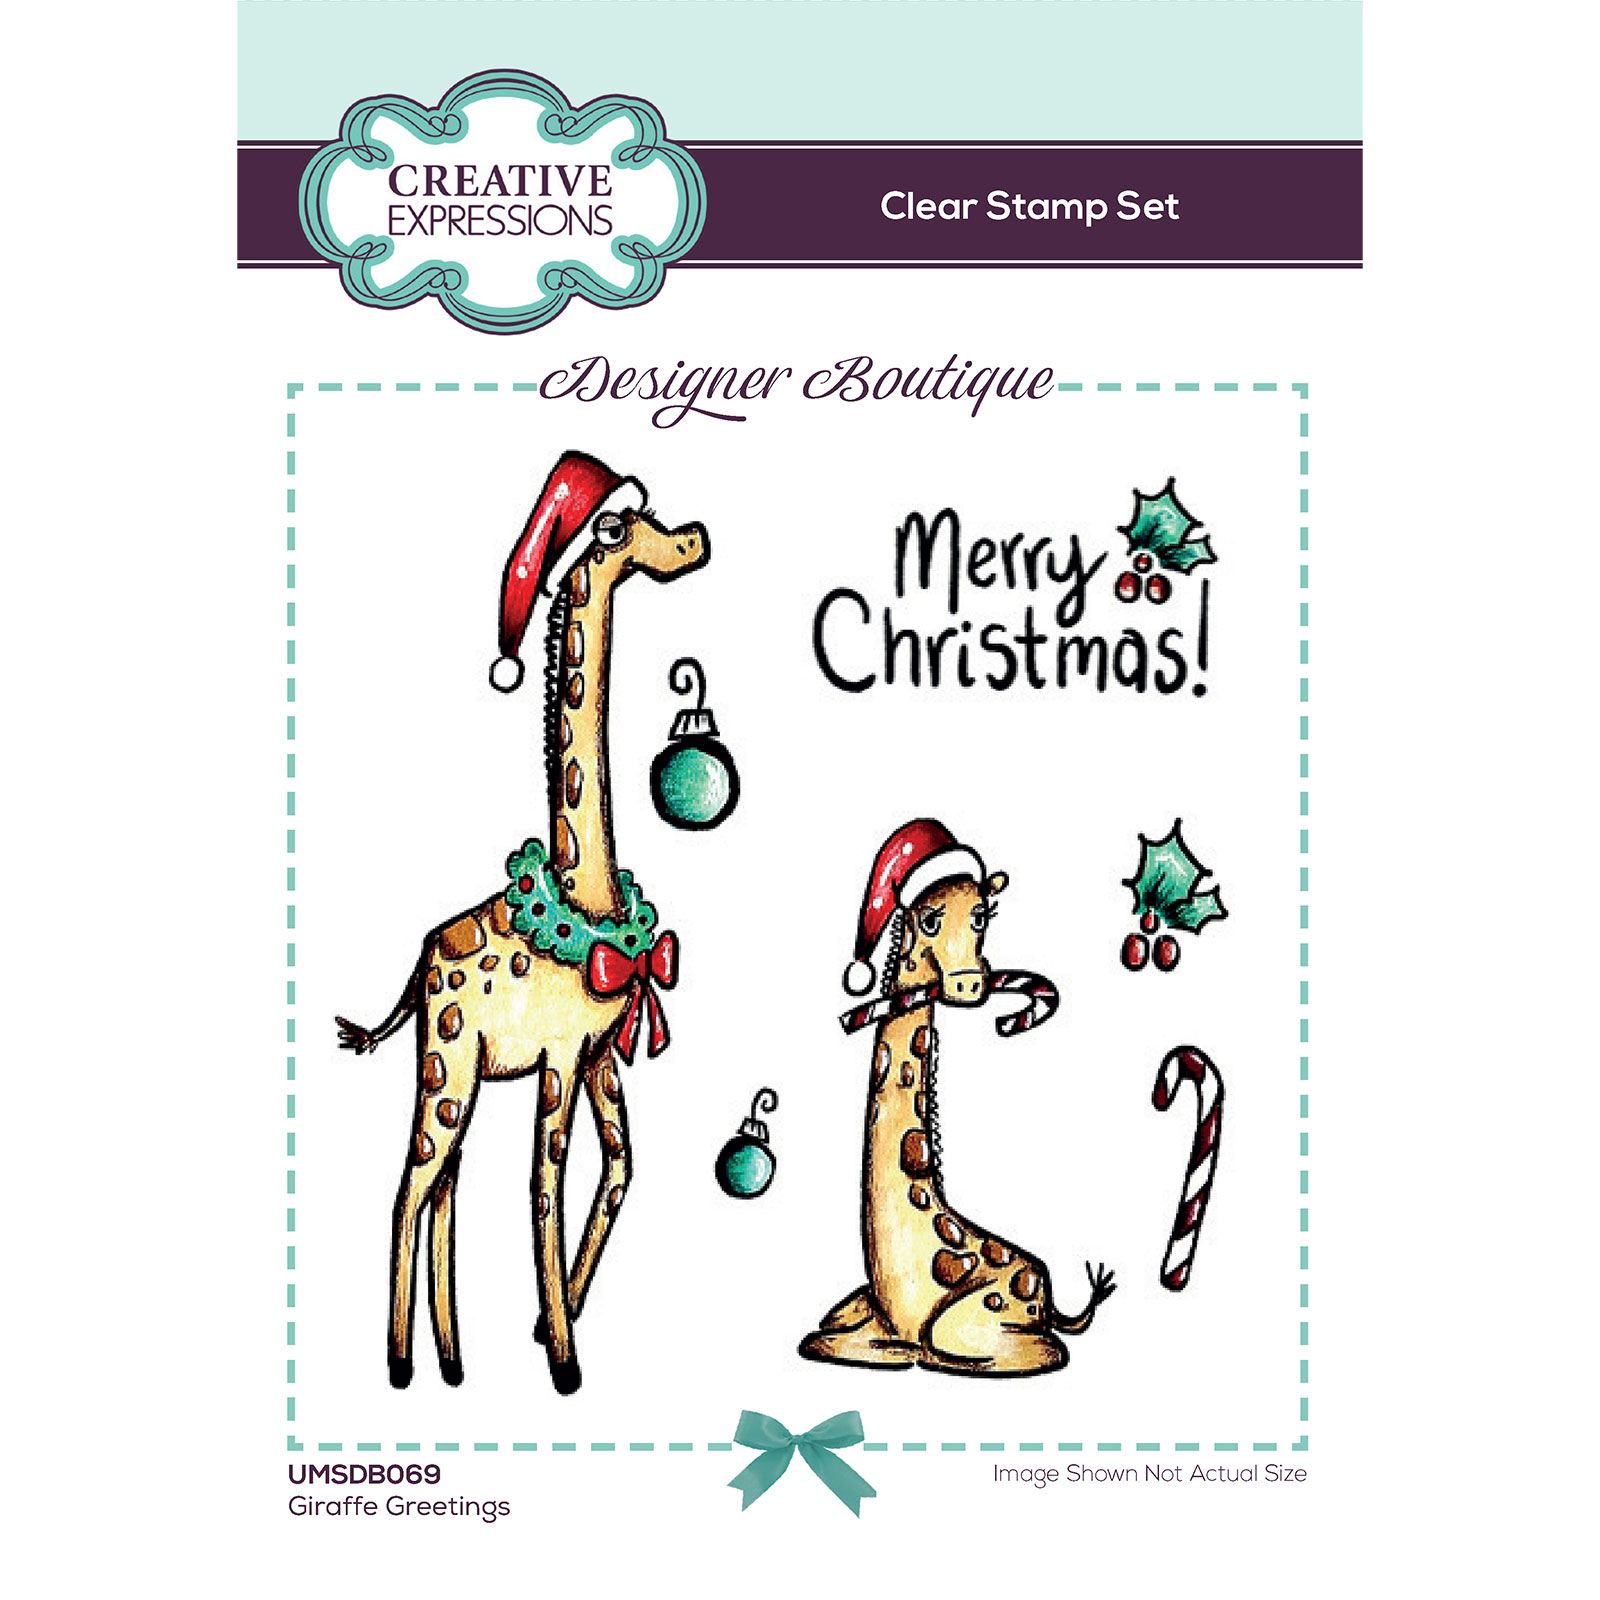 Creative Expressions • Designer boutique collection clear stamp set  Giraffe greetings  A6